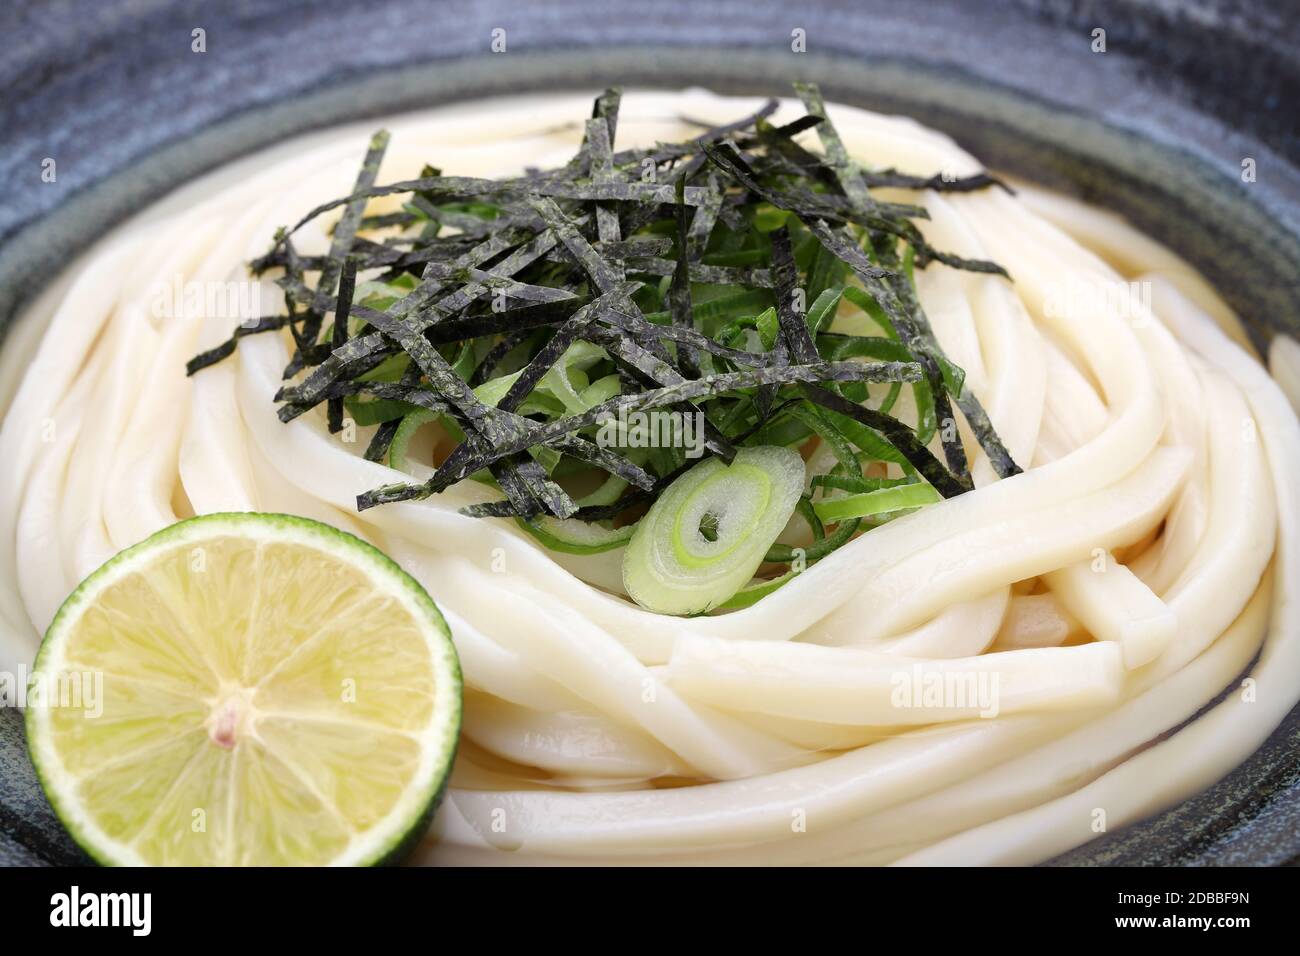 Close up of Japanese bukkake udon noodles in a bowl Stock Photo